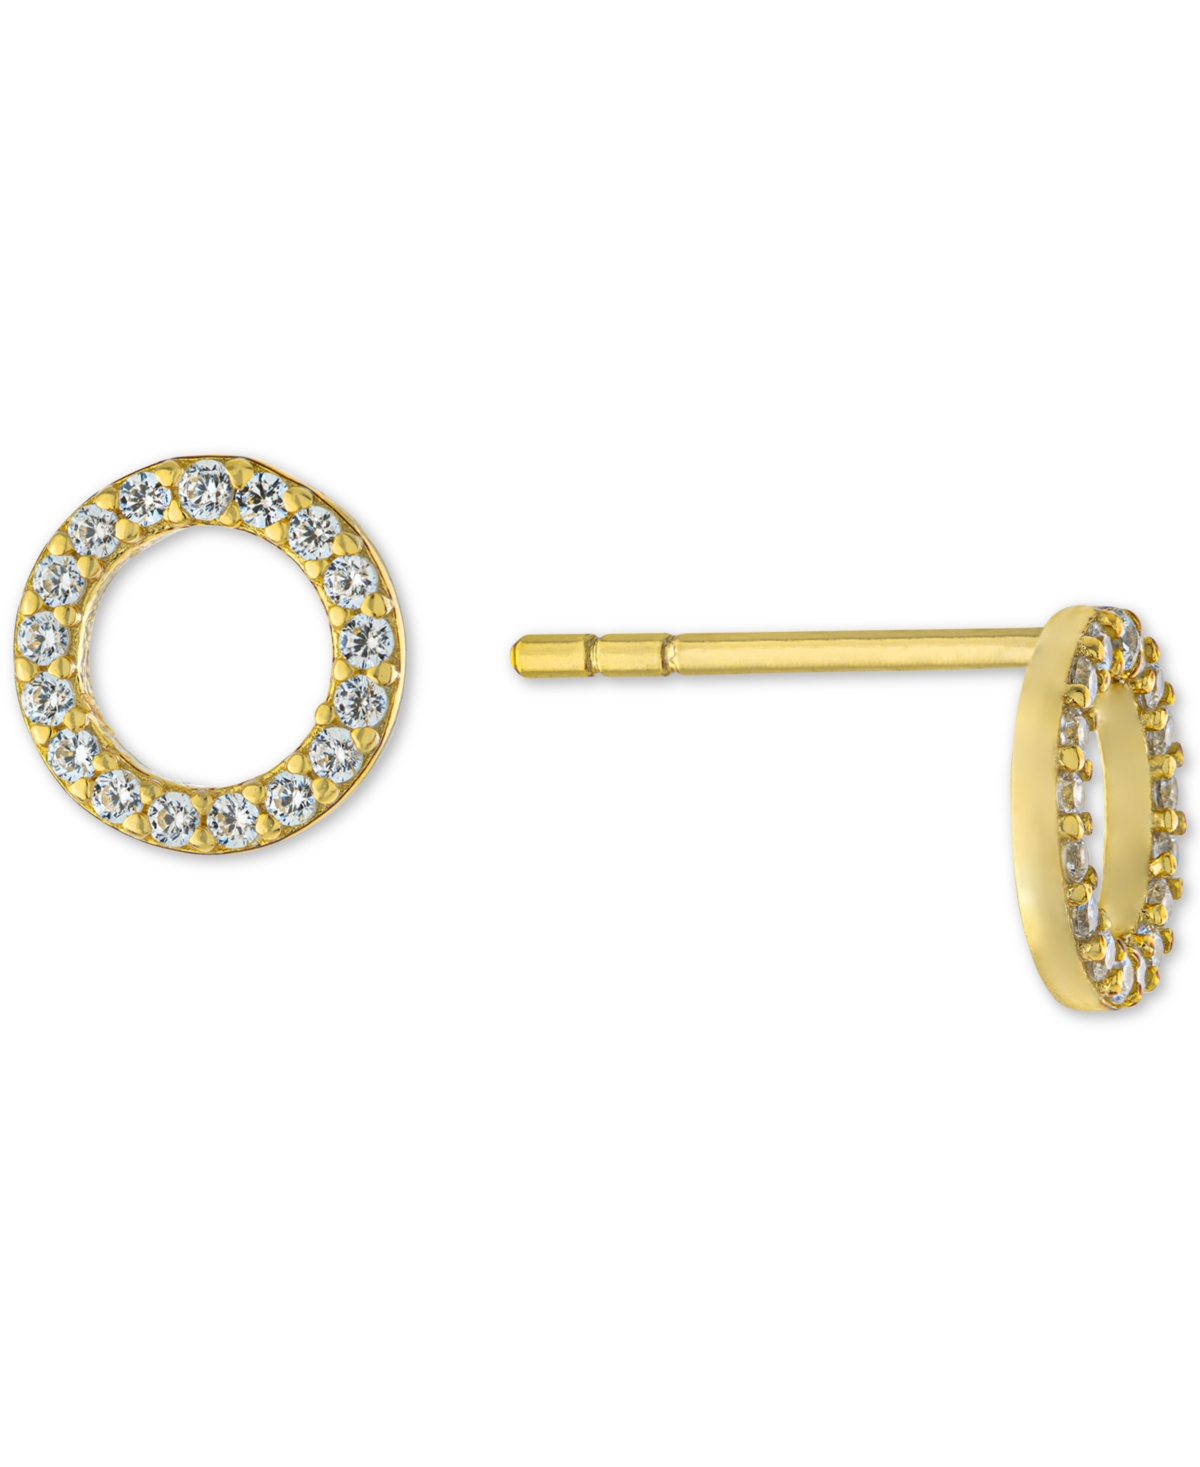 Cubic Zirconia Circle Stud Earrings in Gold-Plated Sterling Silver, Created for Macy's - Yellow Gold